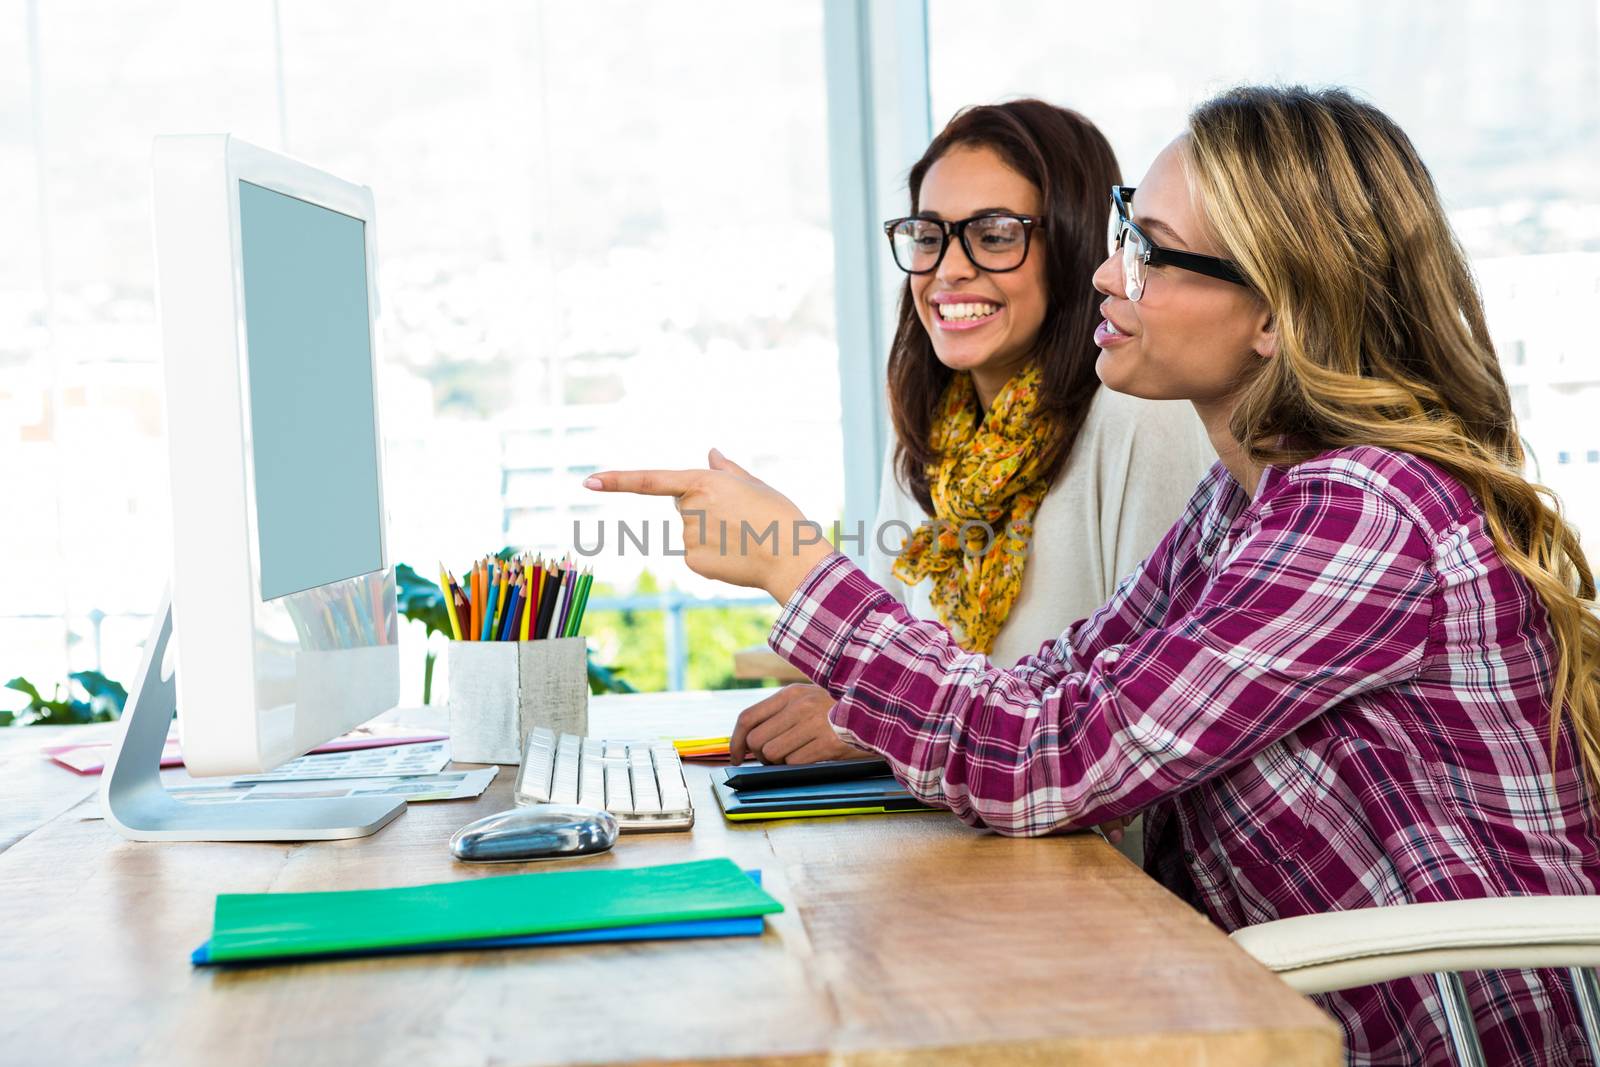 Two girls use a computer in an office